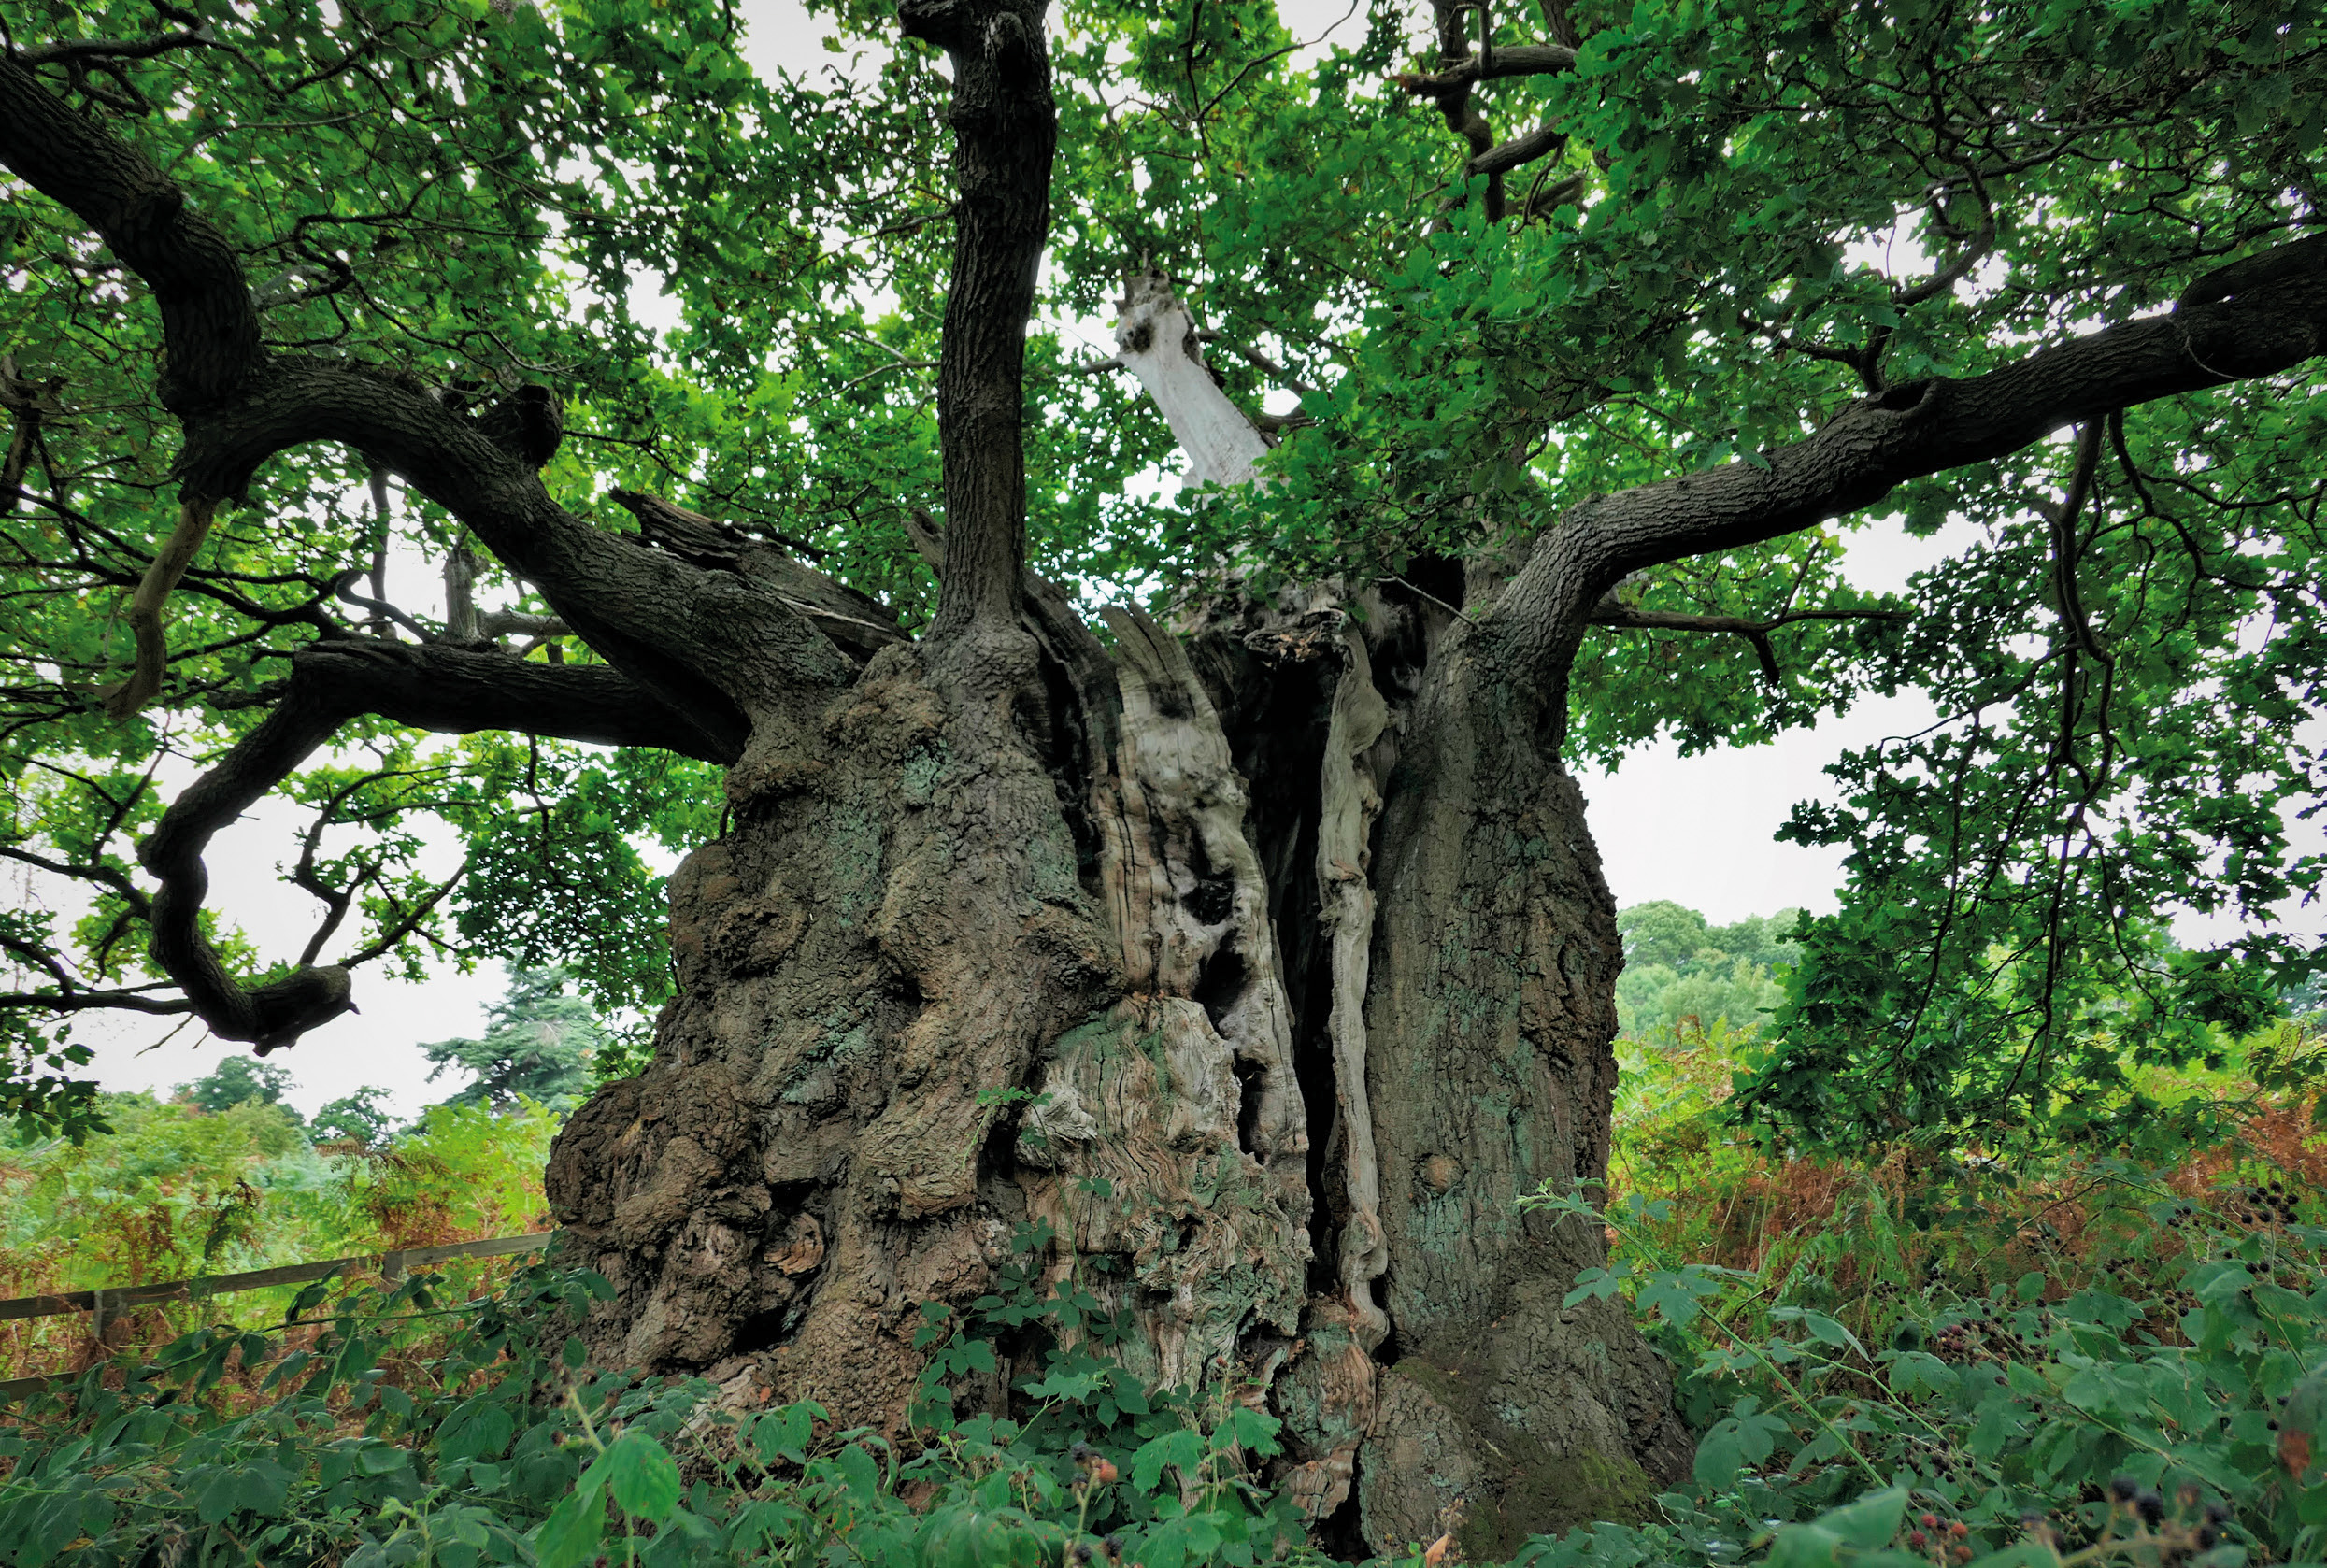 Ancient oak at Calke Abbey, Leicestershire. The Old Man of Calke is a tree of national special interest and one of 15,000 ancient trees recorded across the UK. (Photo: Emma Gilmartin)